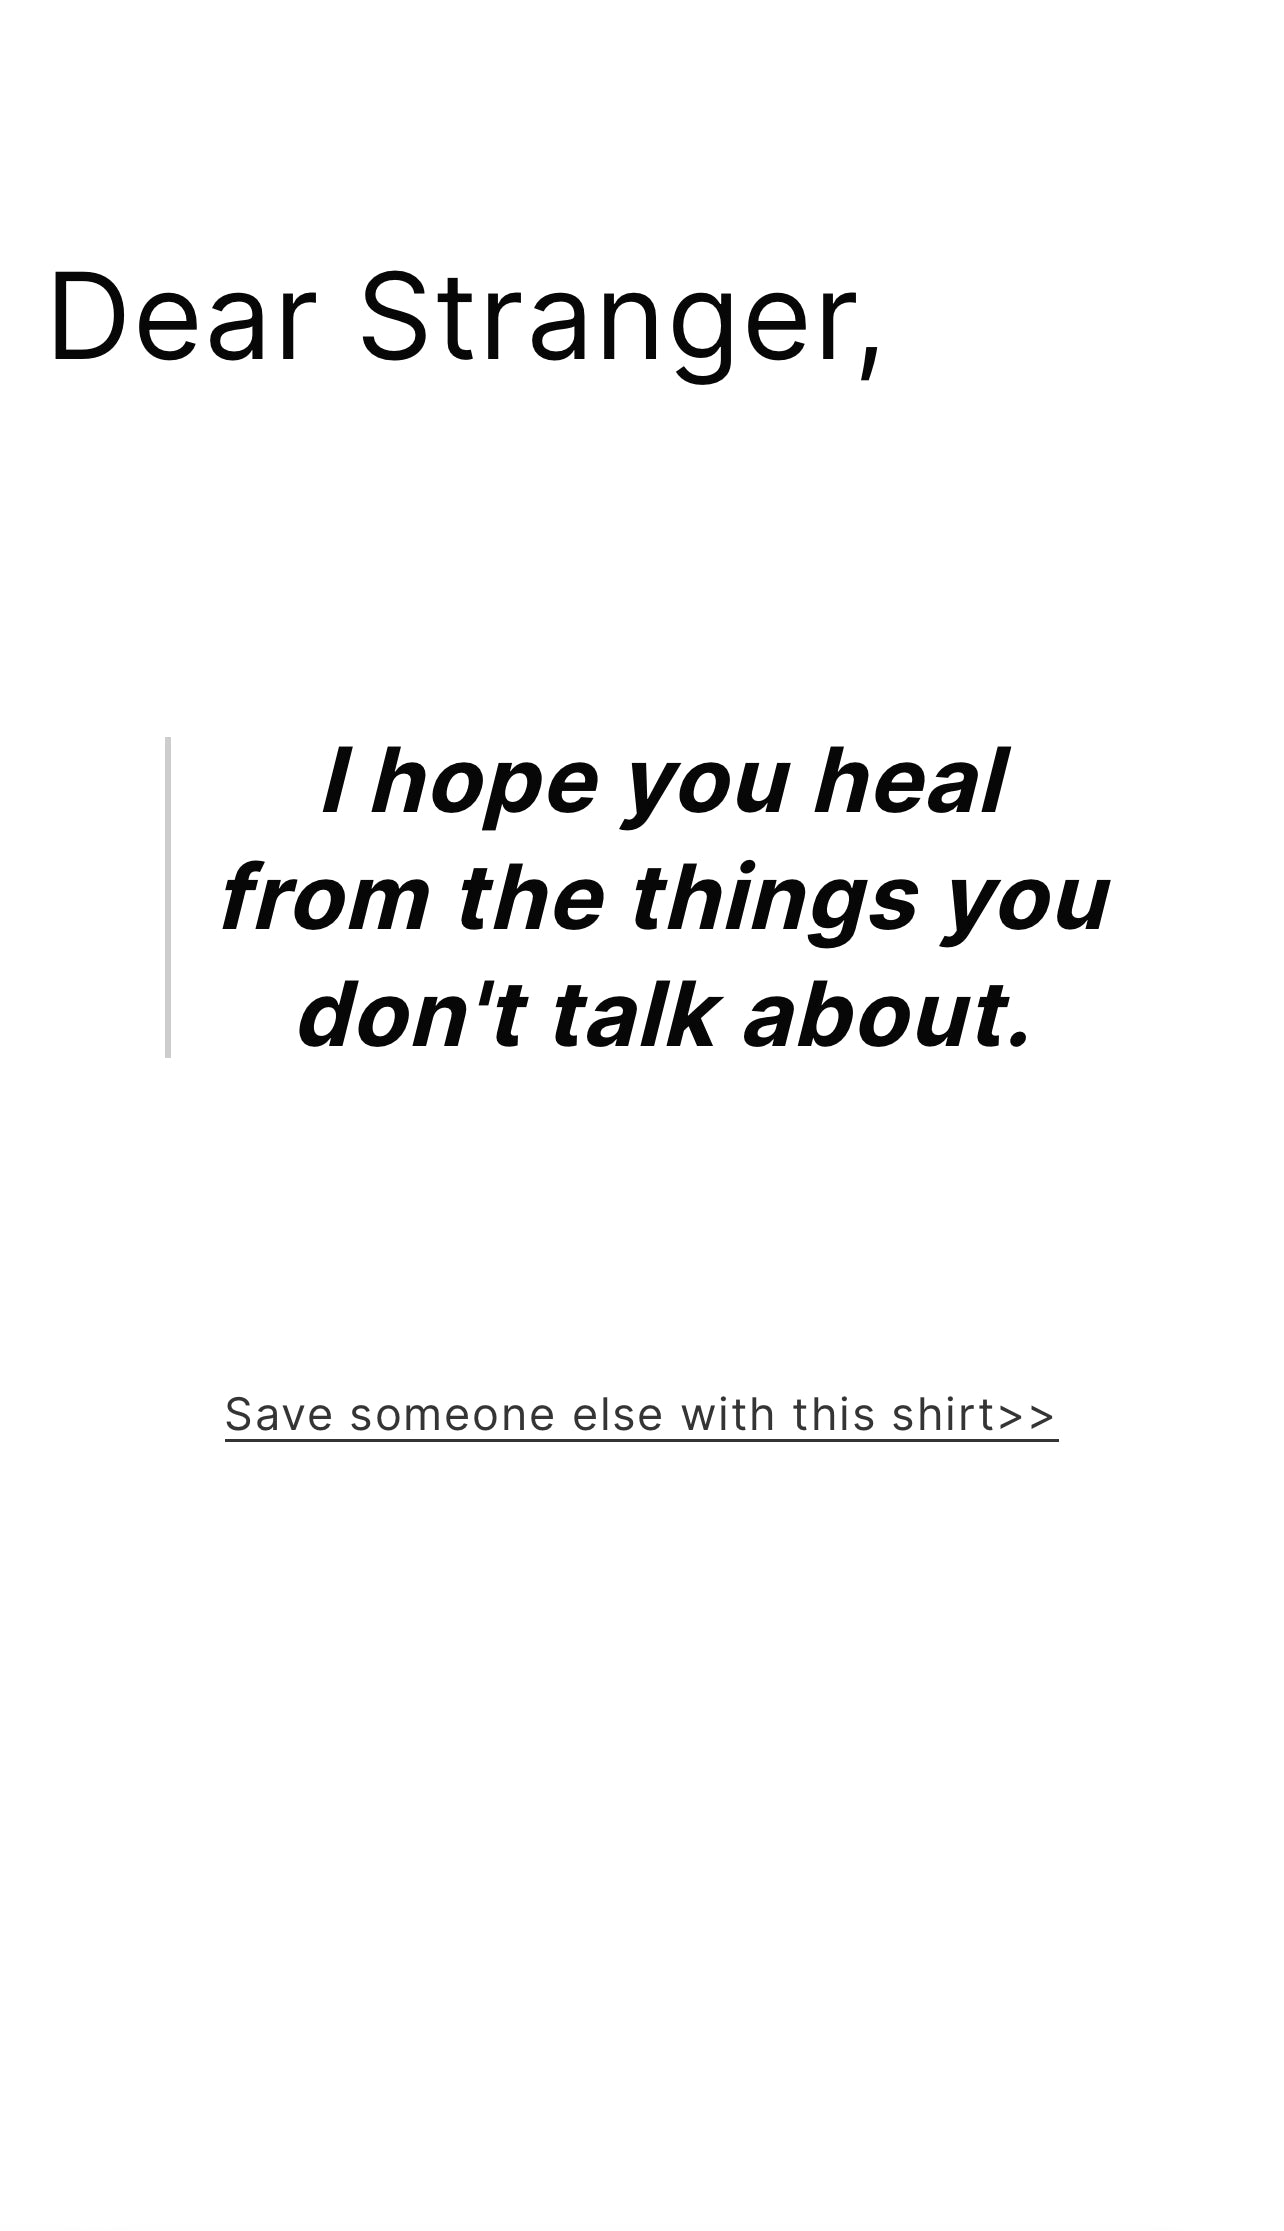 QR code T-Shirt “I hope you heal from the things you don’t talk about.”